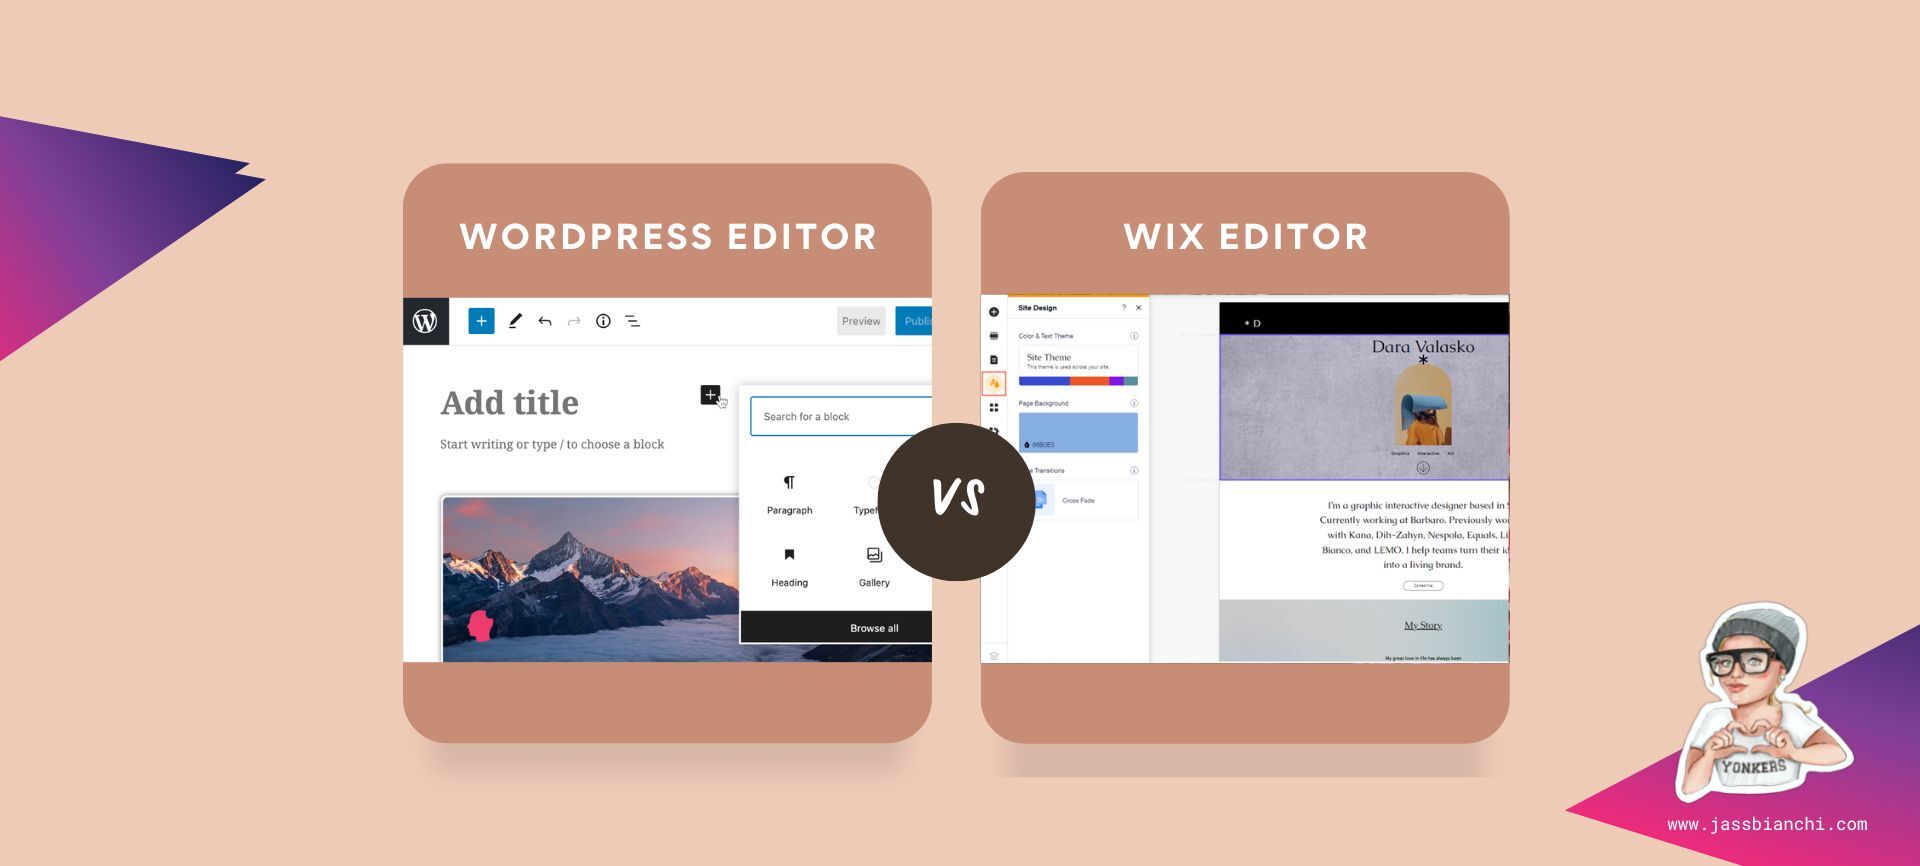 WordPress vs Wix Editor: Which is the Better Option?